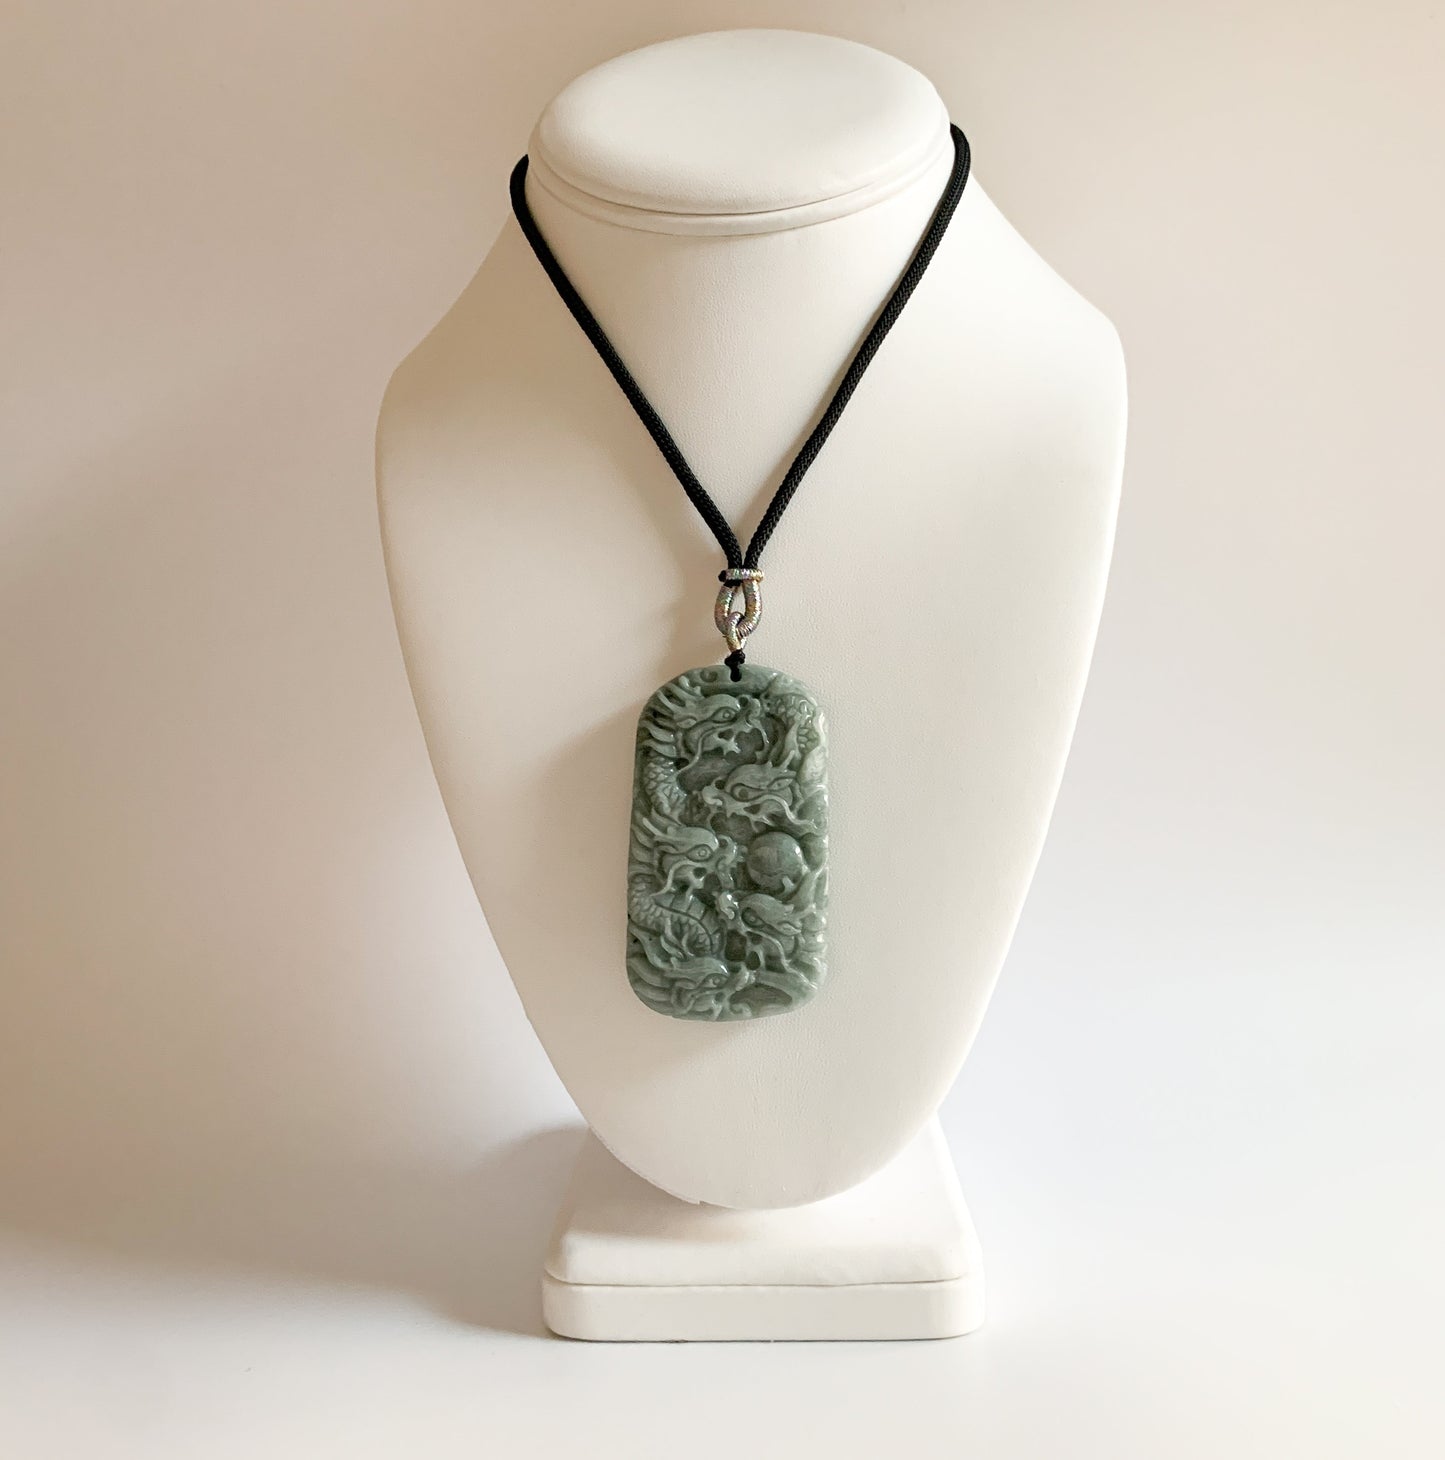 9 Dragon Jadeite Jade Chinese Zodiac Hand Carved Pendant Necklace, YJ-0321-0337442-1 - AriaDesignCollection